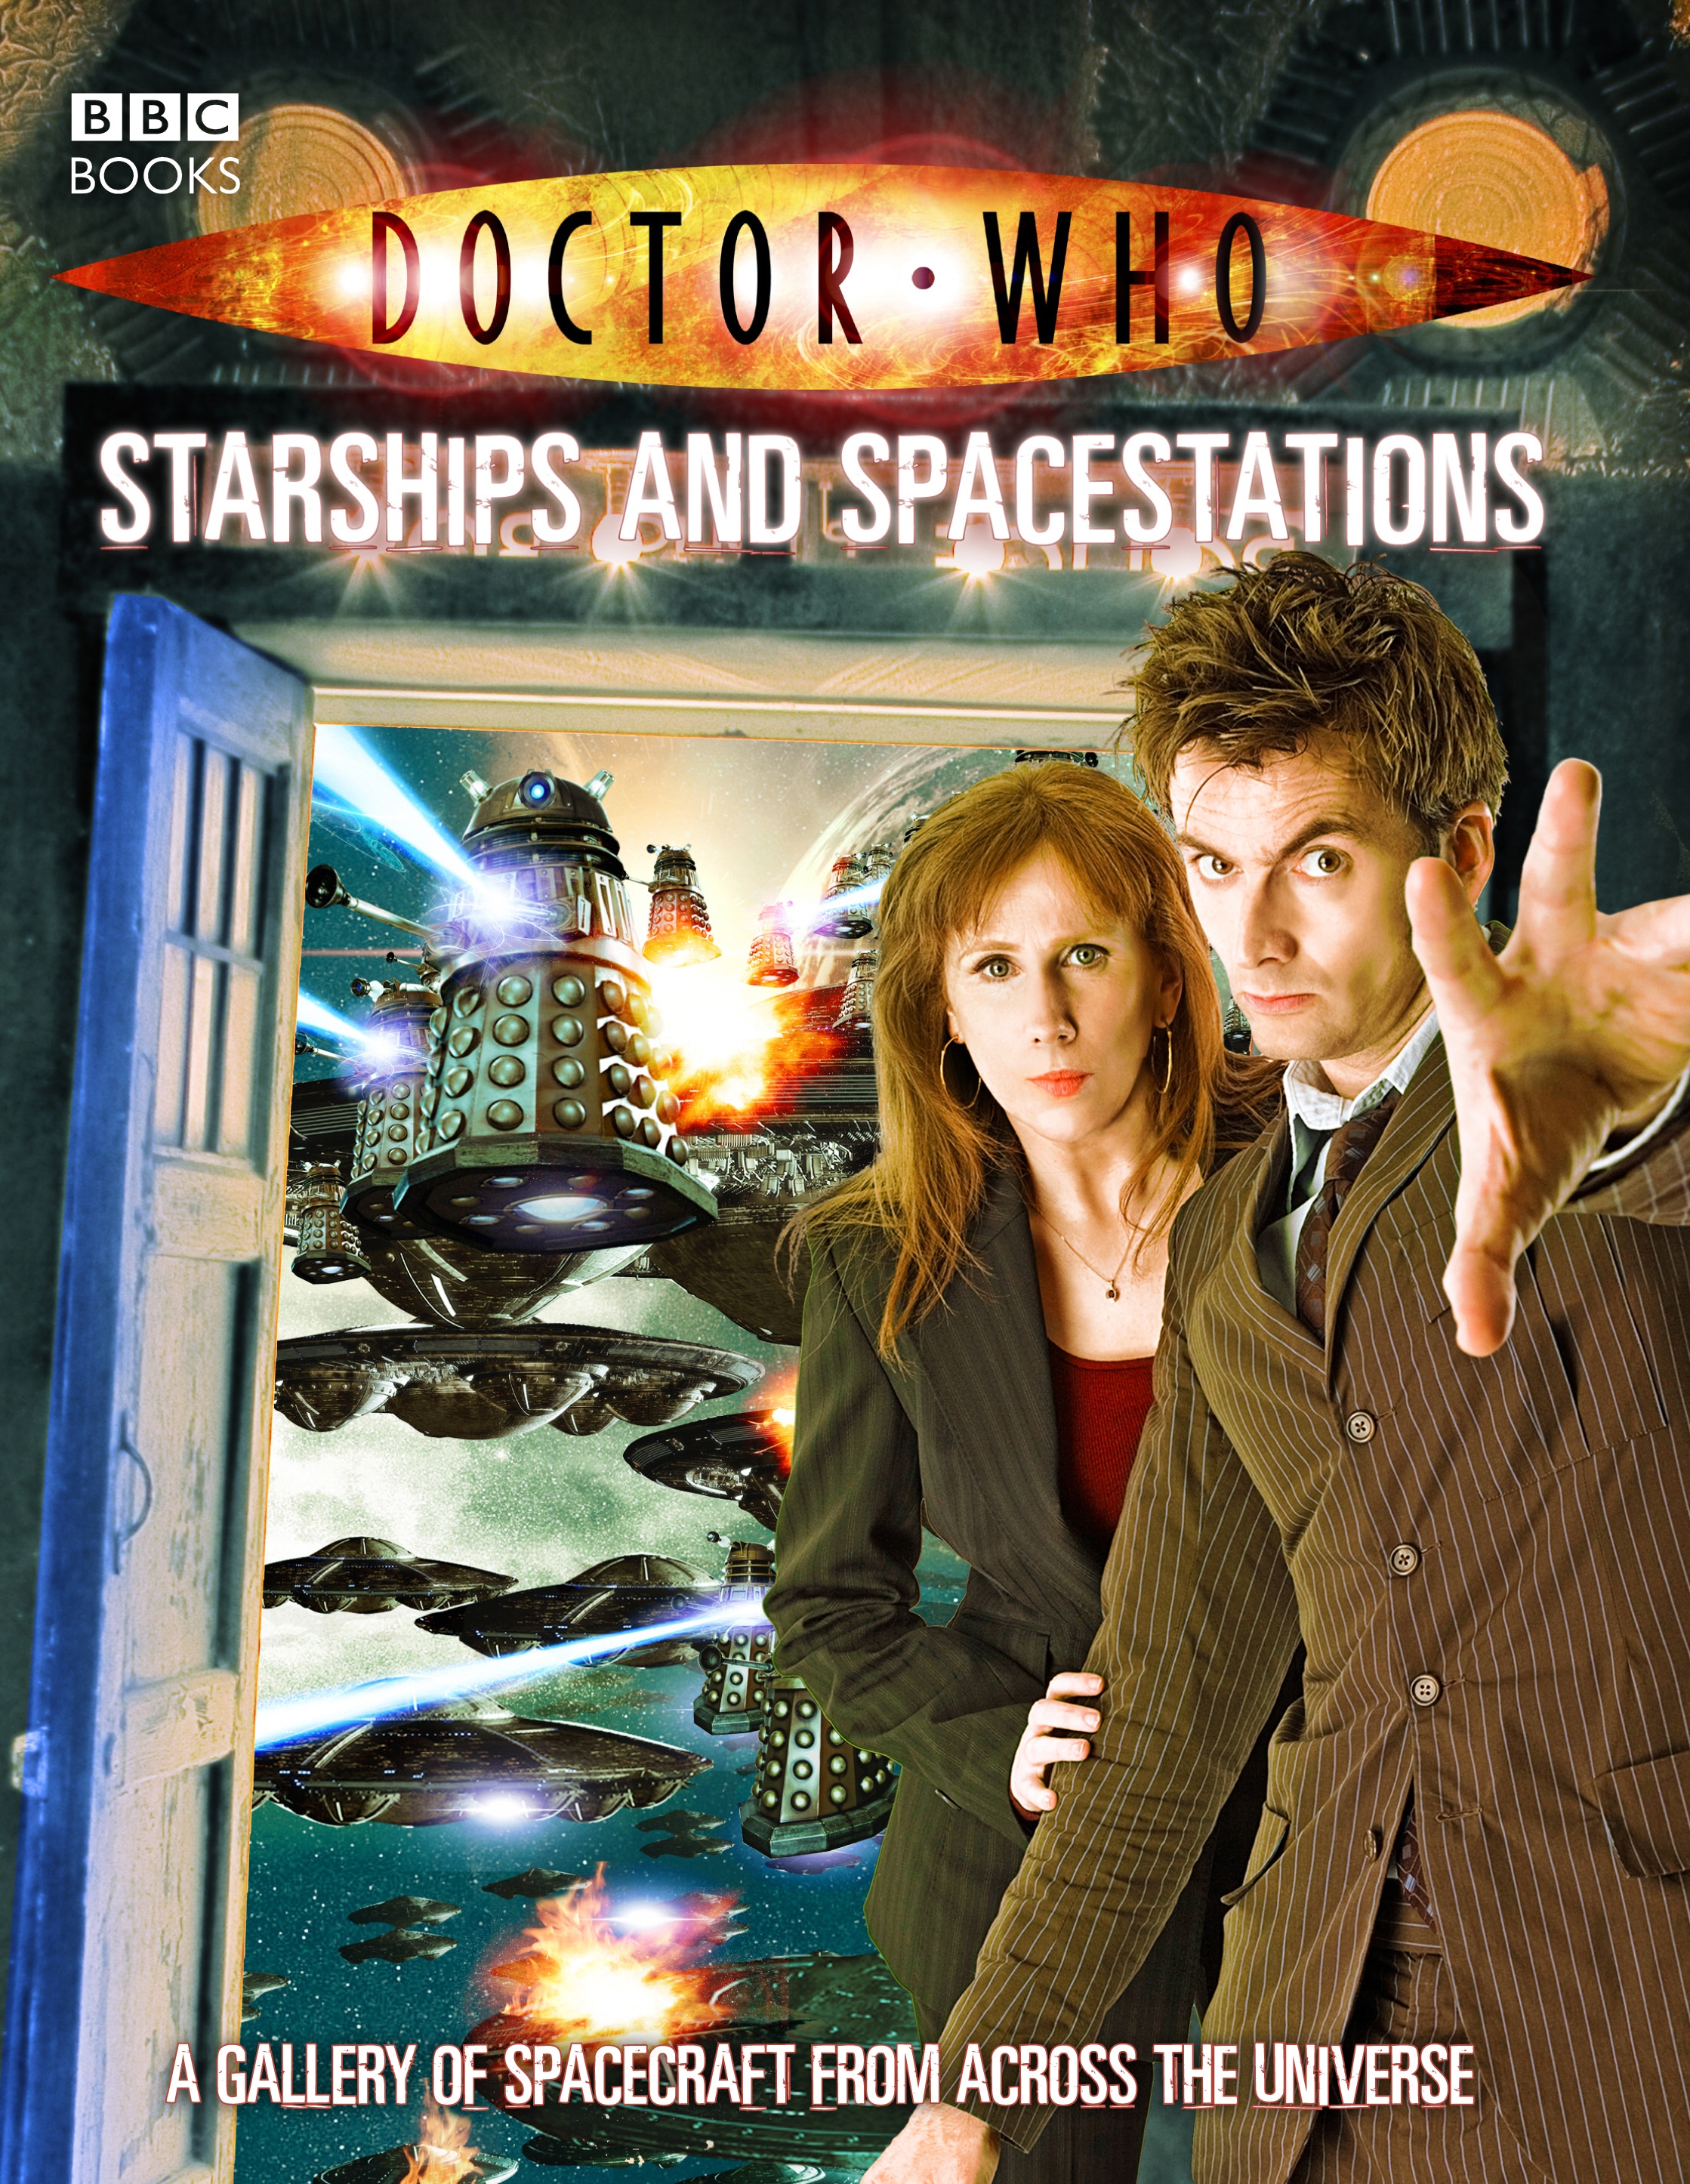 Book “Doctor Who: Starships and Spacestations” by Justin Richards — May 15, 2008